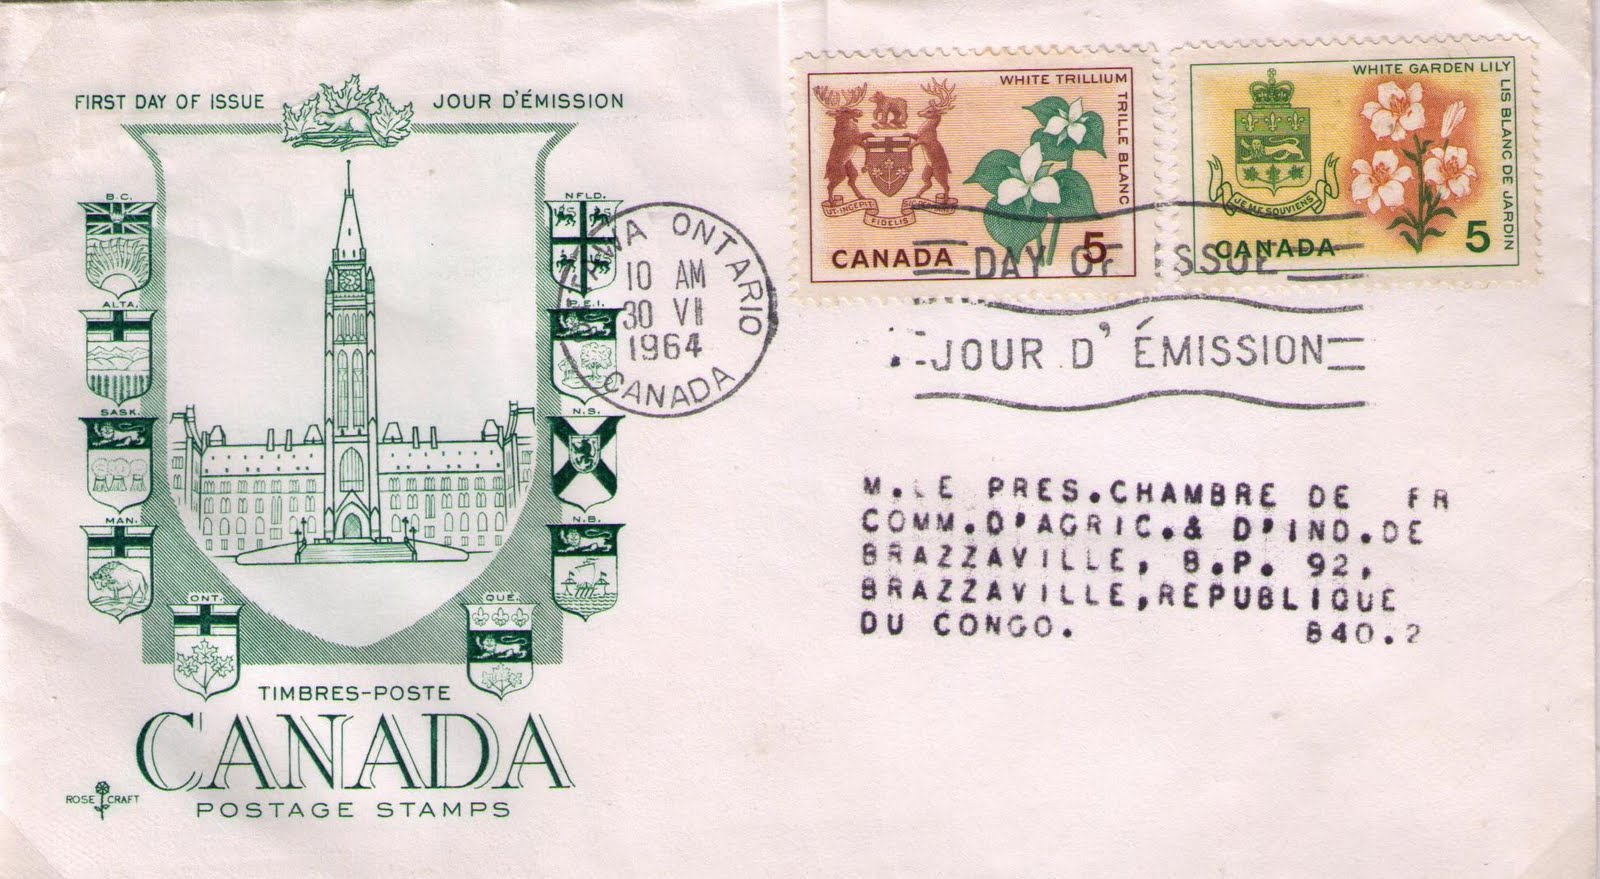 Canada+post+office